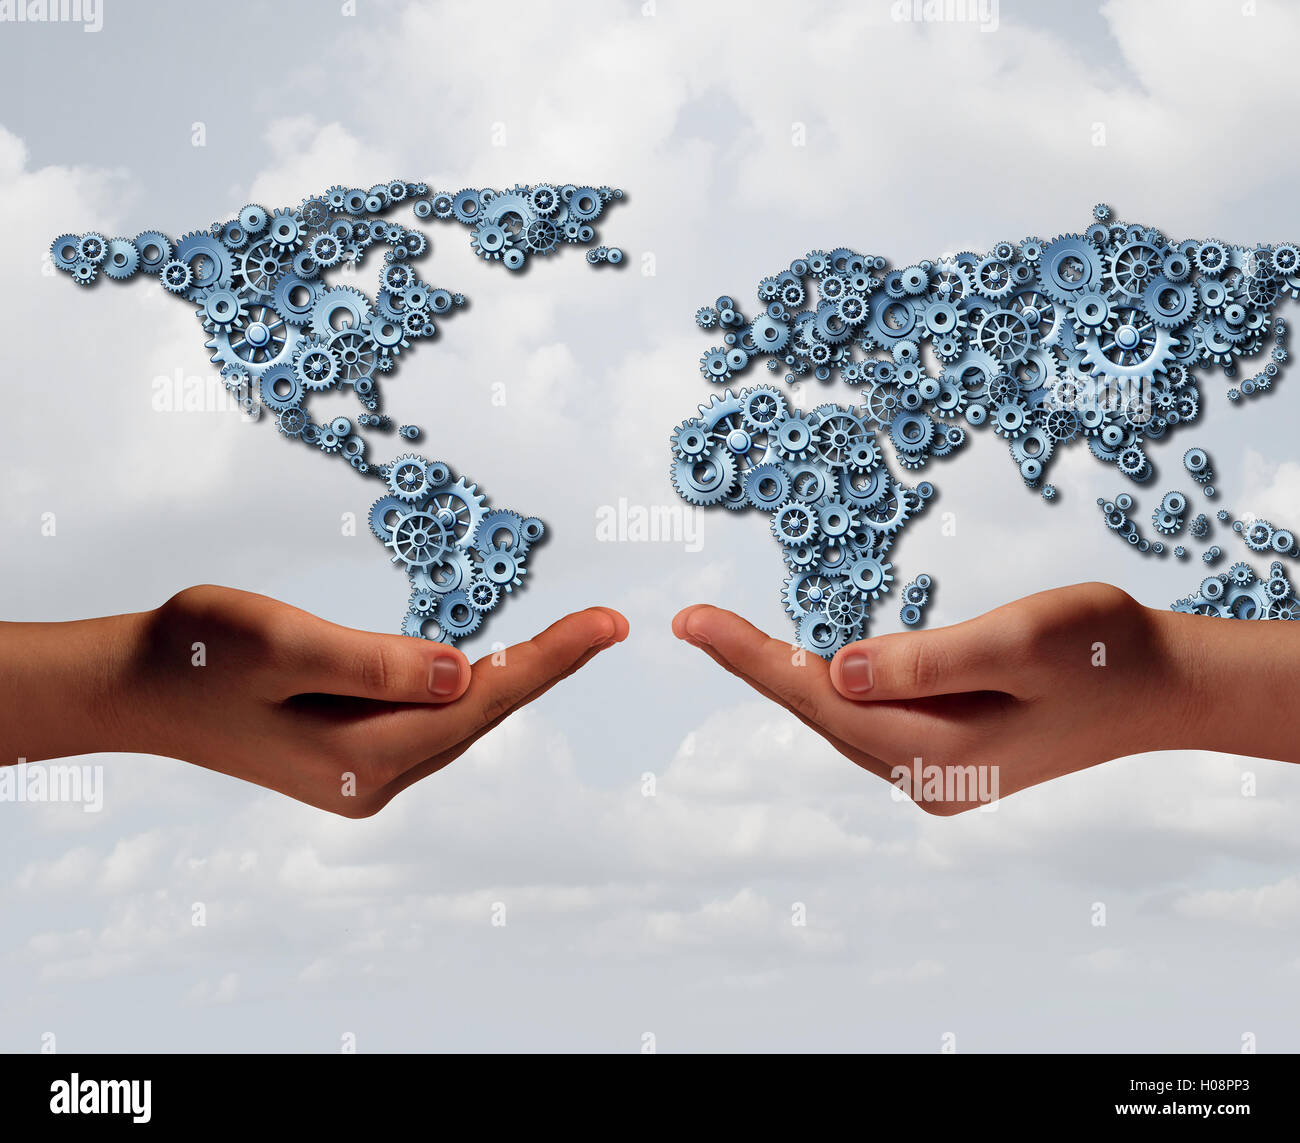 Global industry trade and international business agreement concept as two diverse hands holding a group of gears shaped as the world with 3D illustration elements. Stock Photo